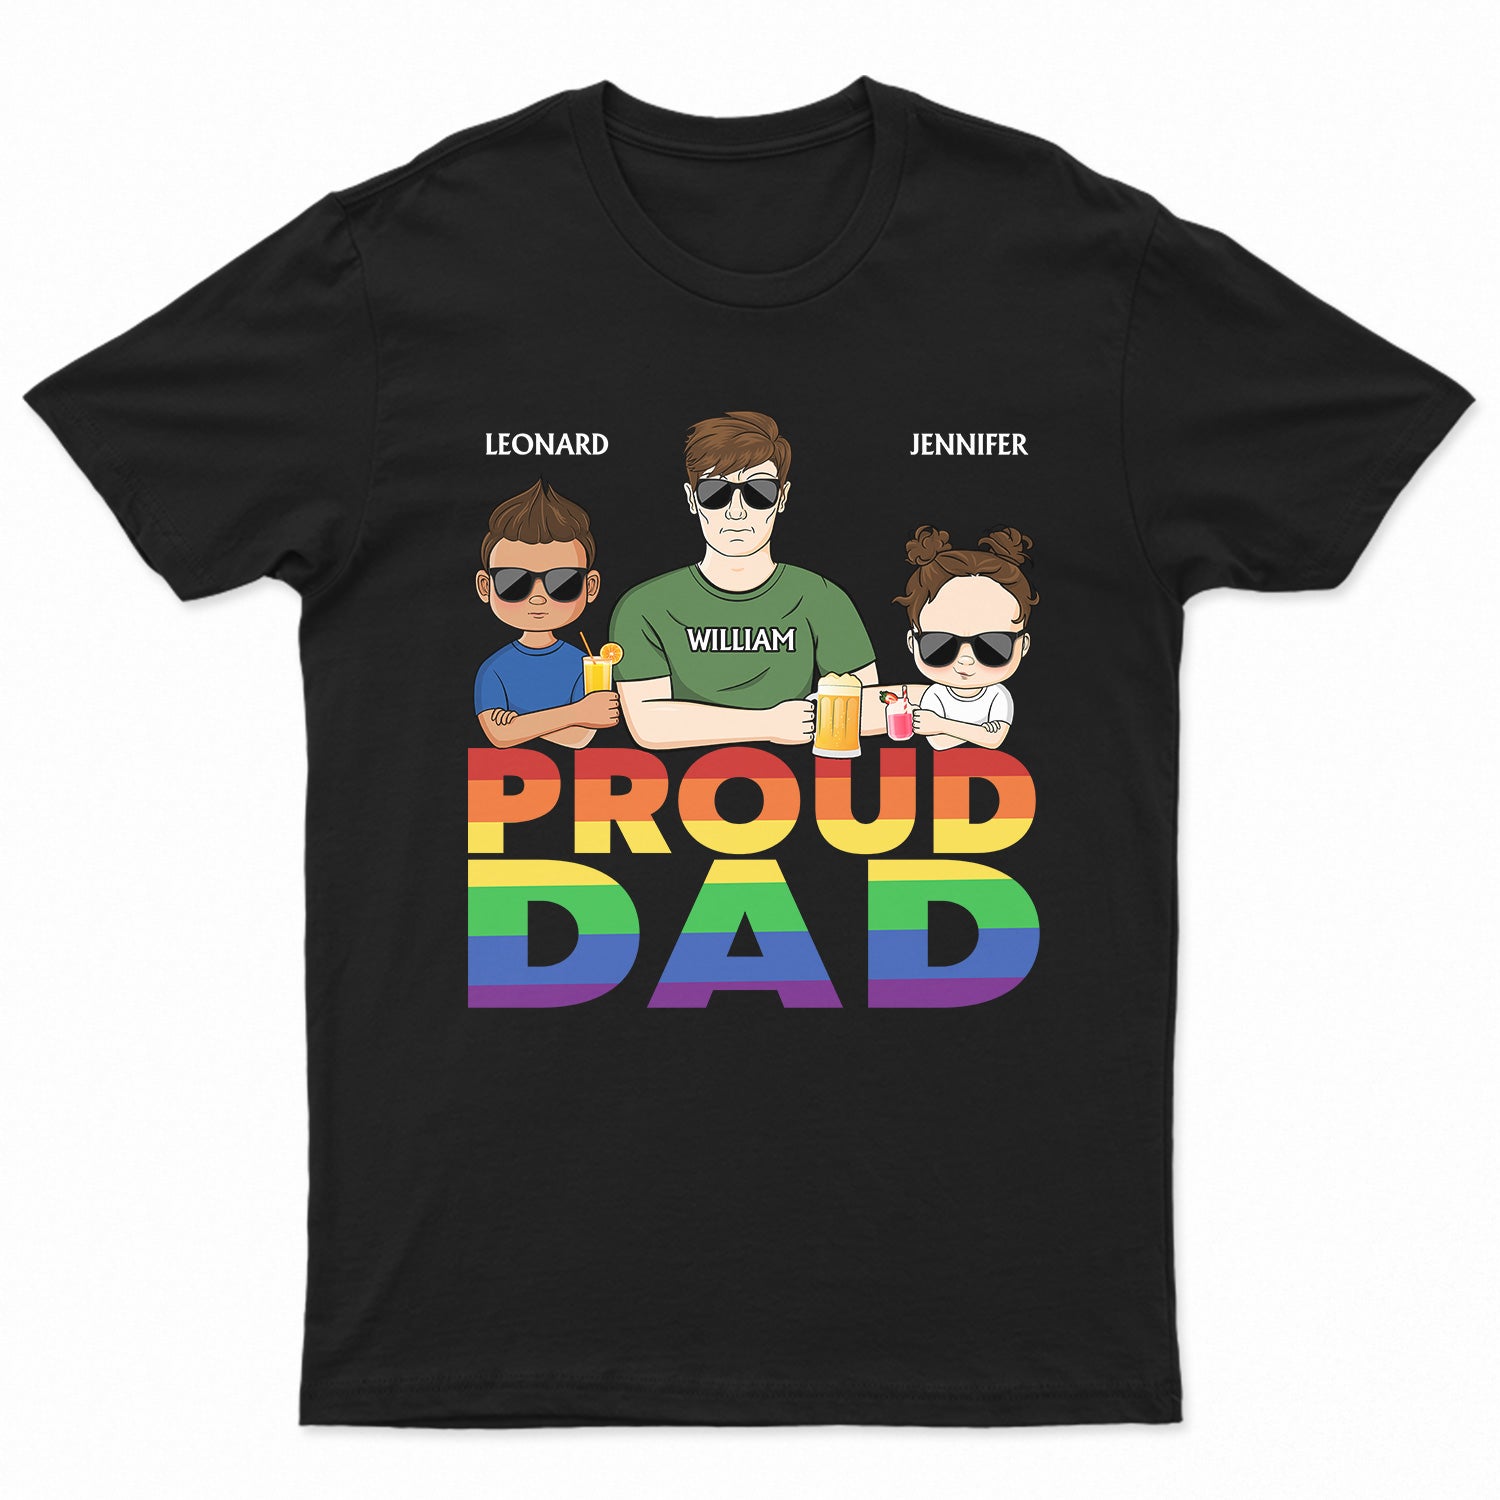 Proud Dad - Funny Gift For Pride Dad, Father, Grandpa - Personalized T Shirt